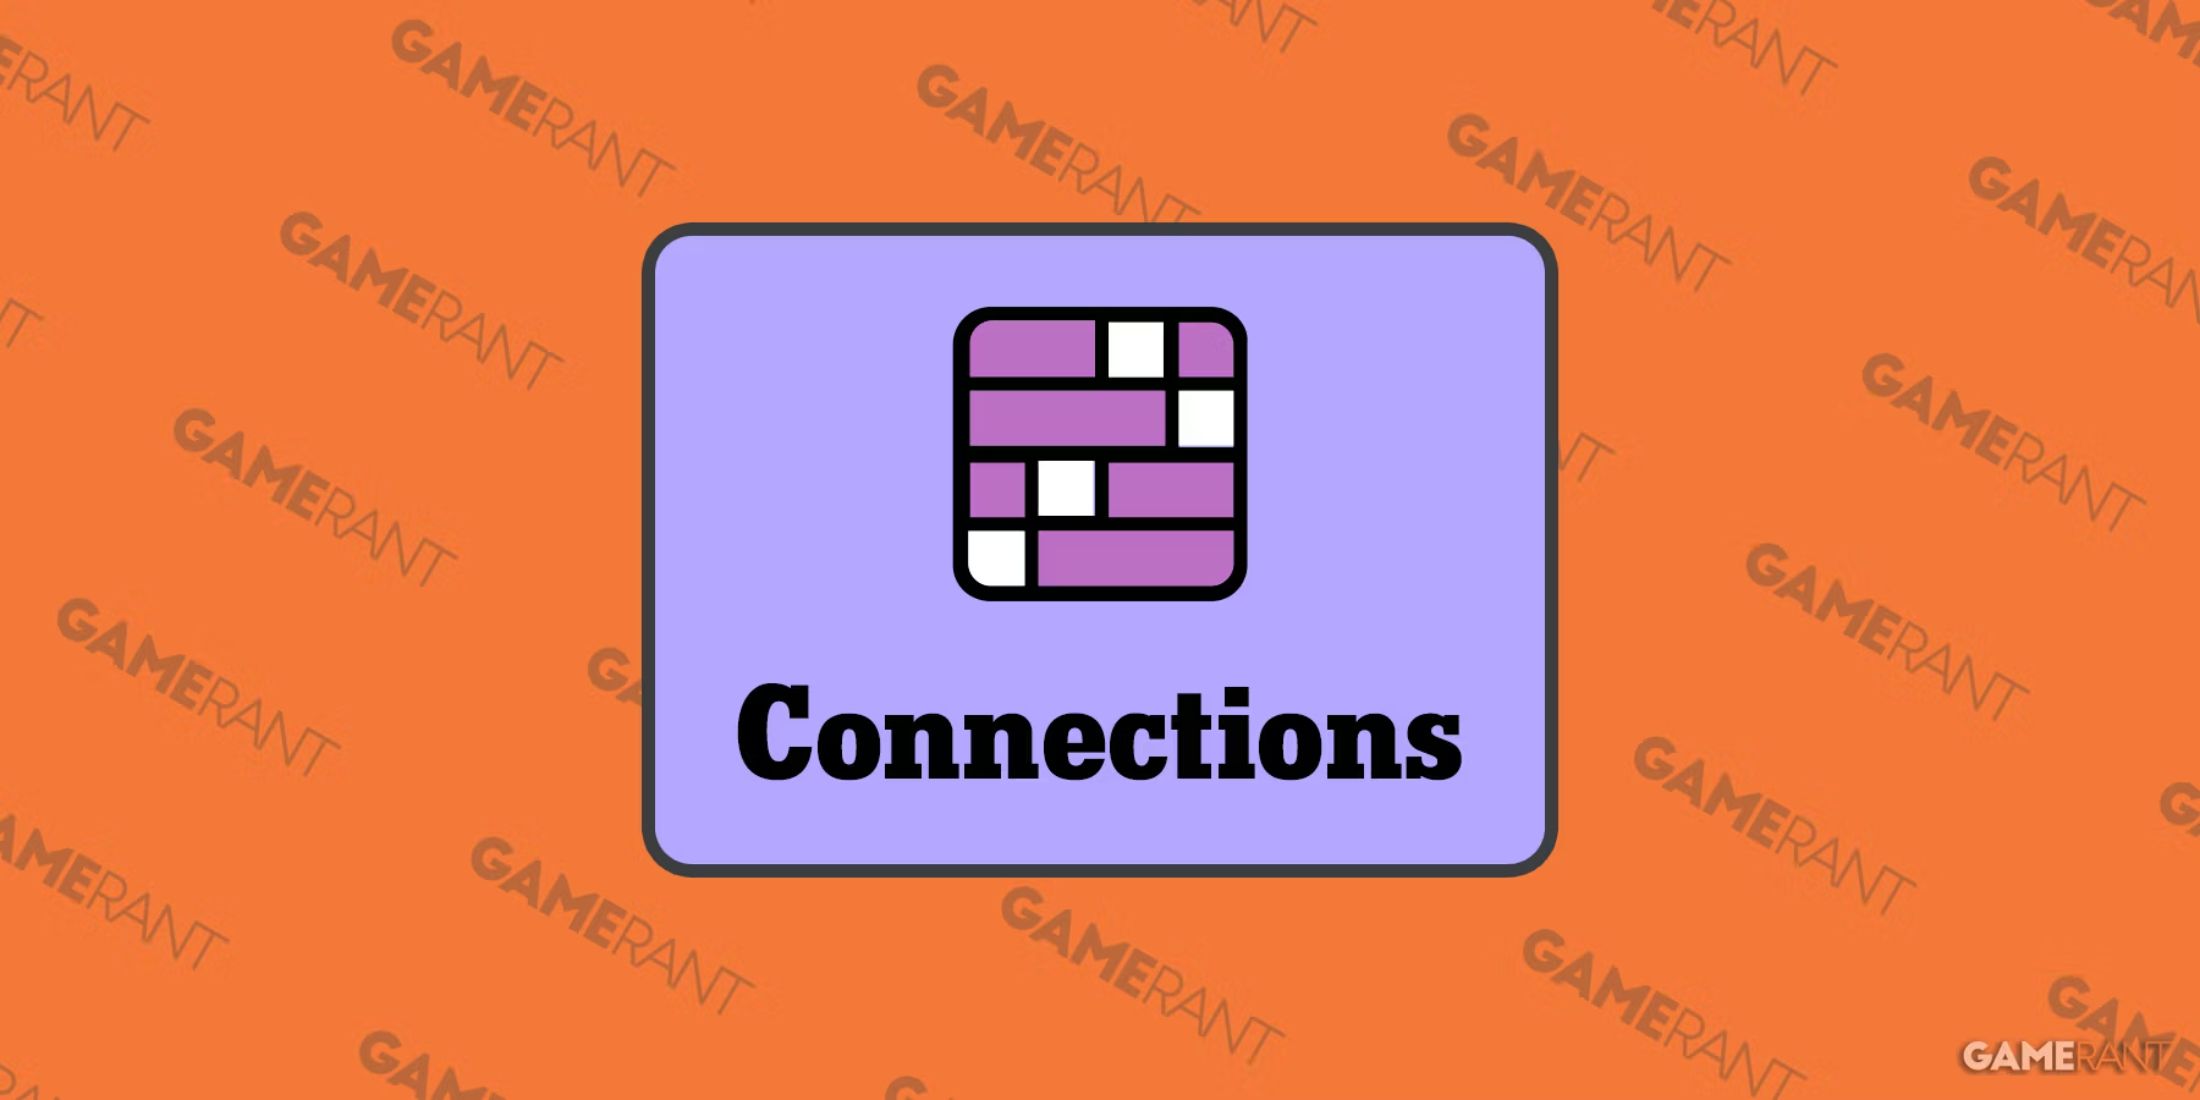 New York Times Connections logo